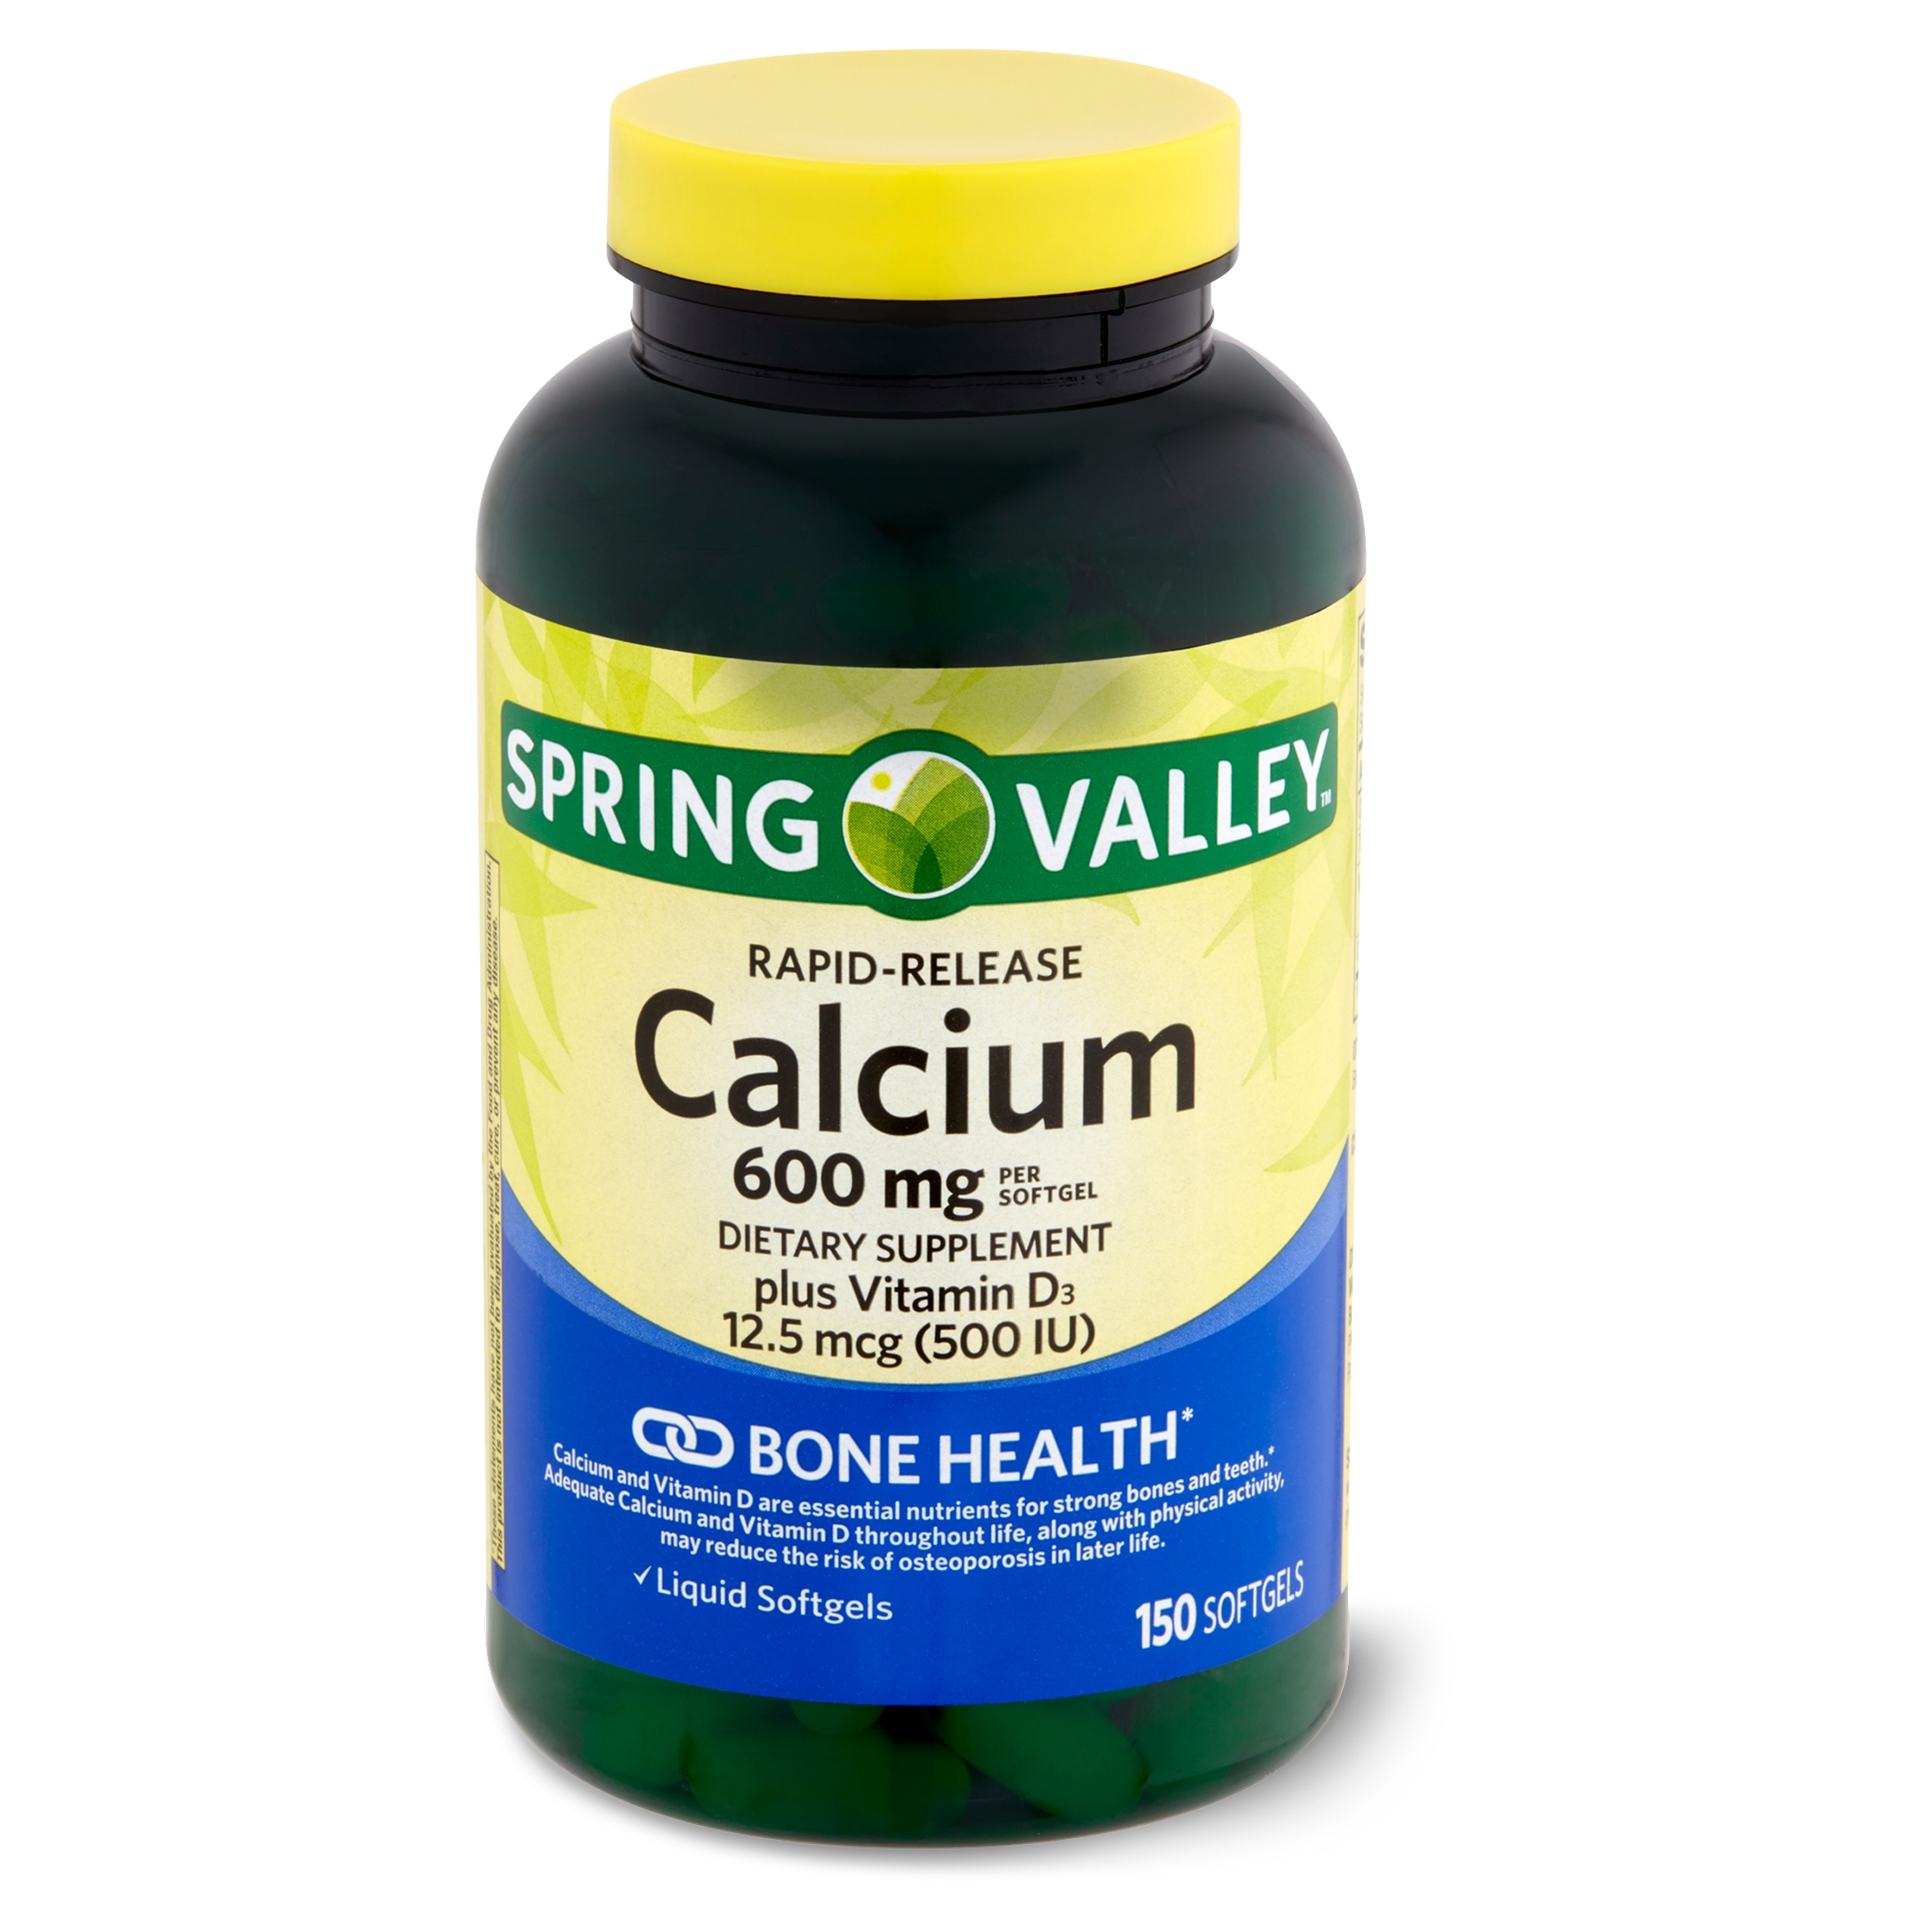 Spring Valley Rapid-Release Calcium Dietary Supplement, 600 mg, 150 Count - image 1 of 9